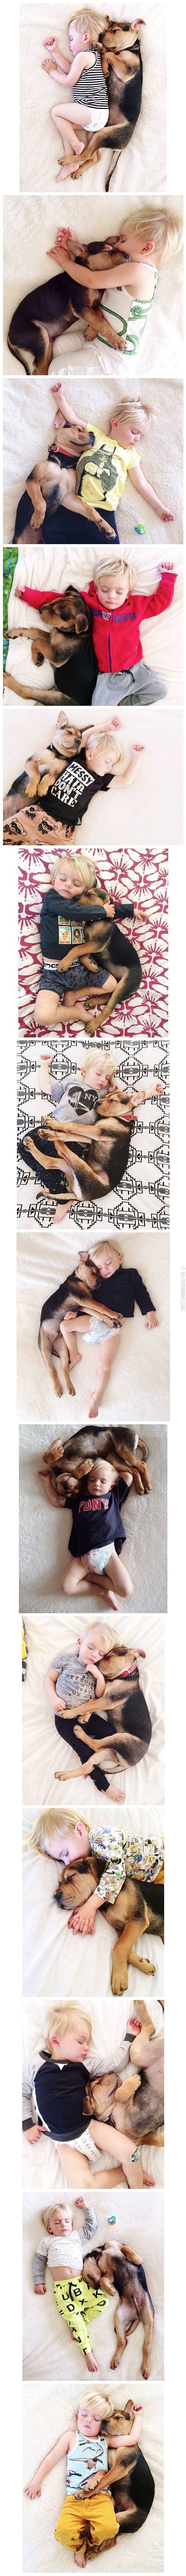 A+toddler+and+his+dog.